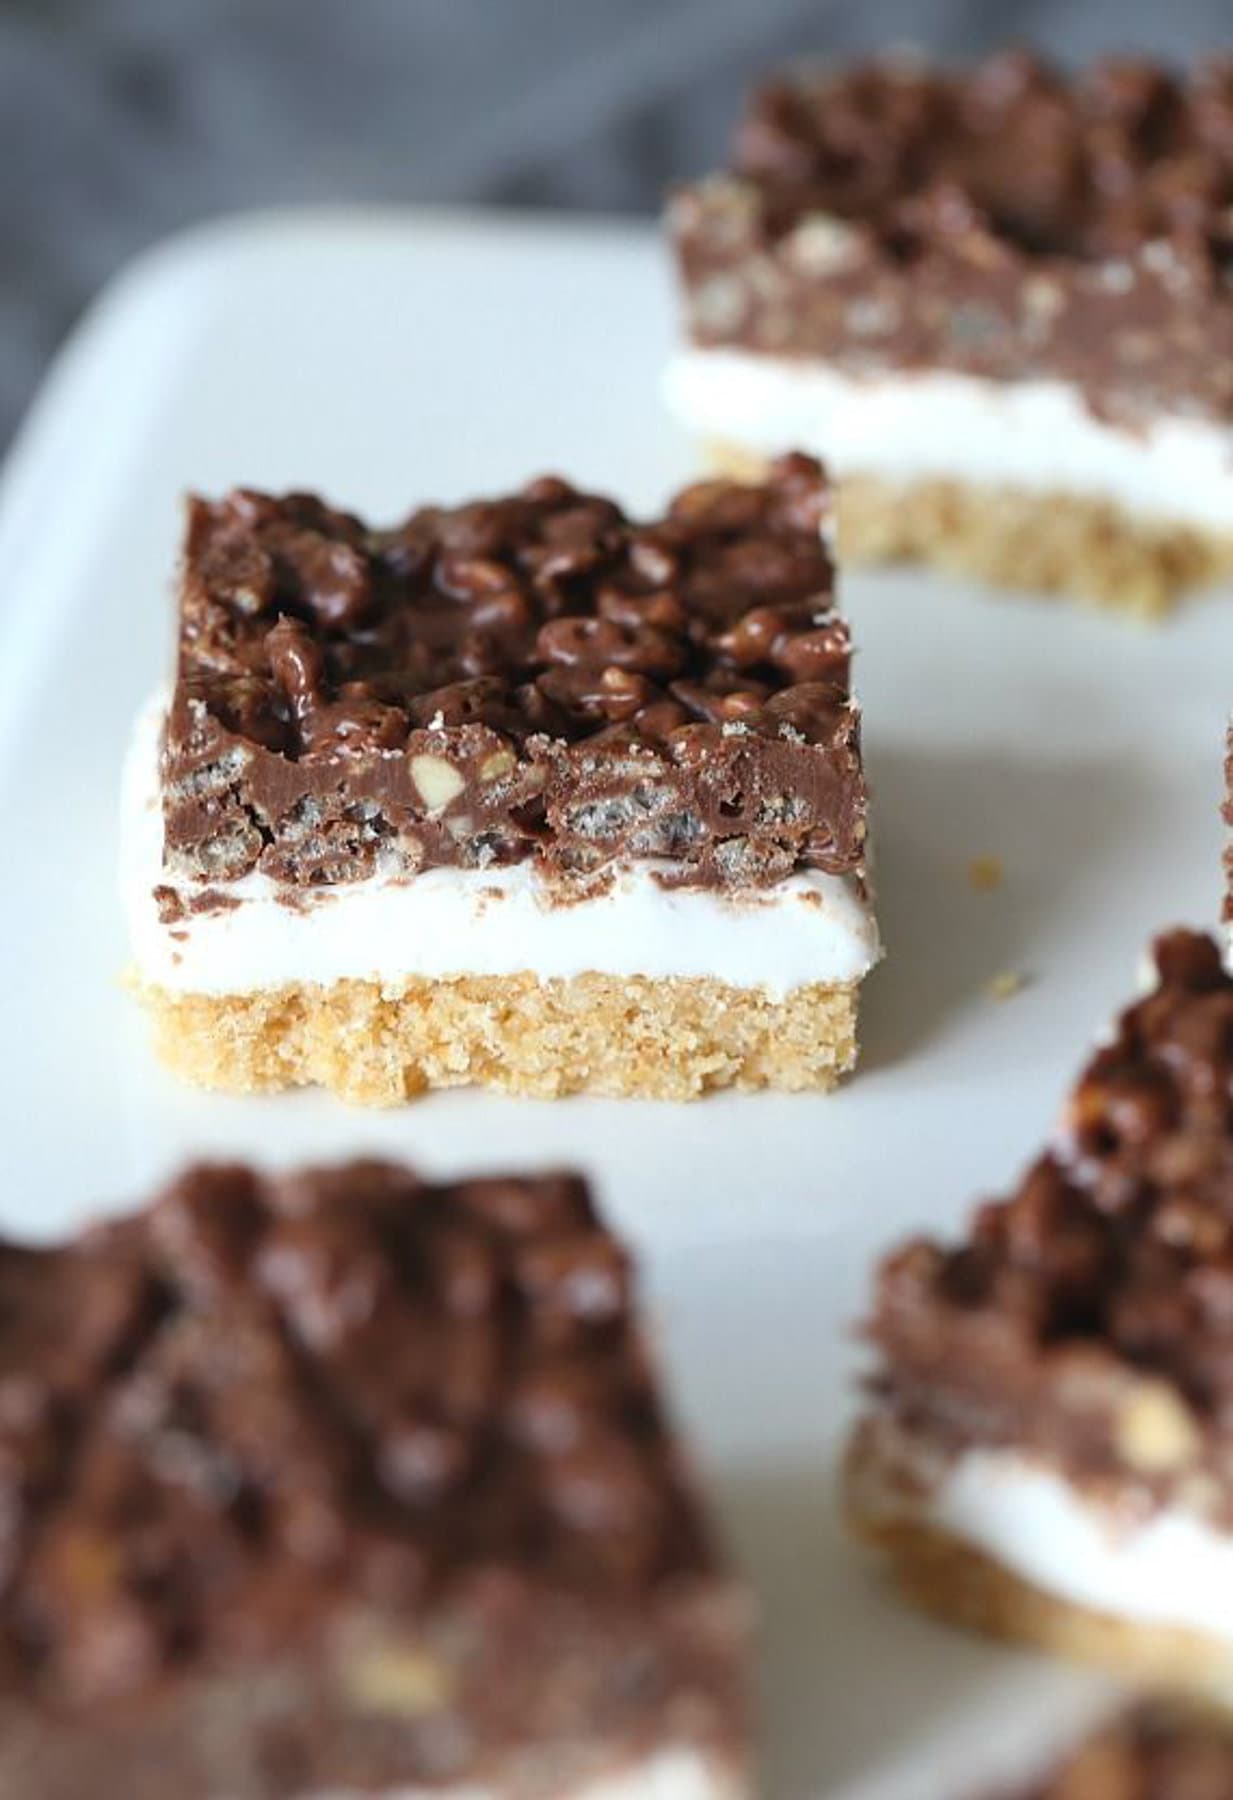 Layered Krispie treat served to eat